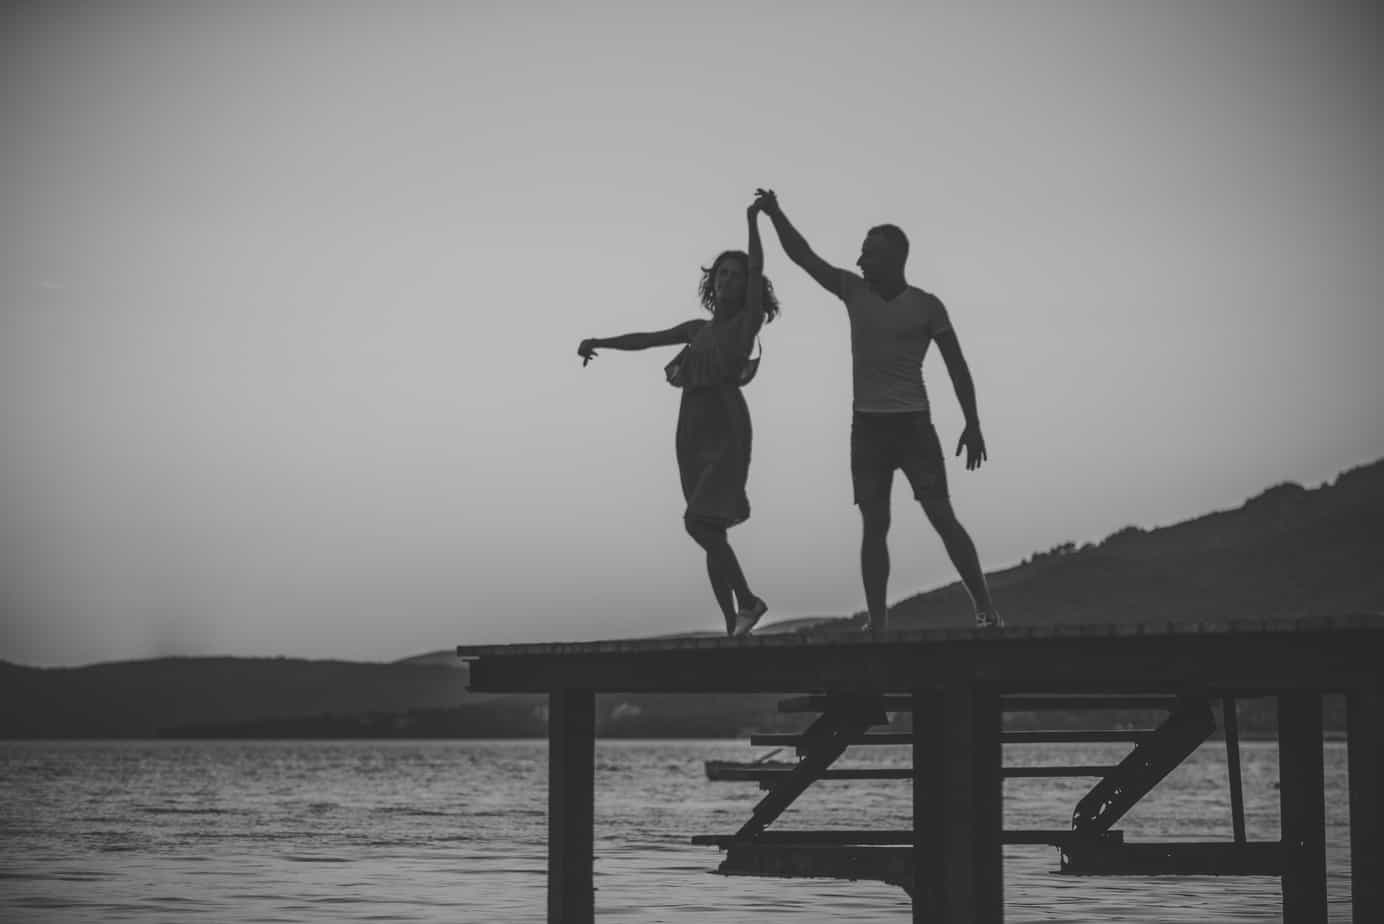 A couple twirls and dances together on a pier by the water.